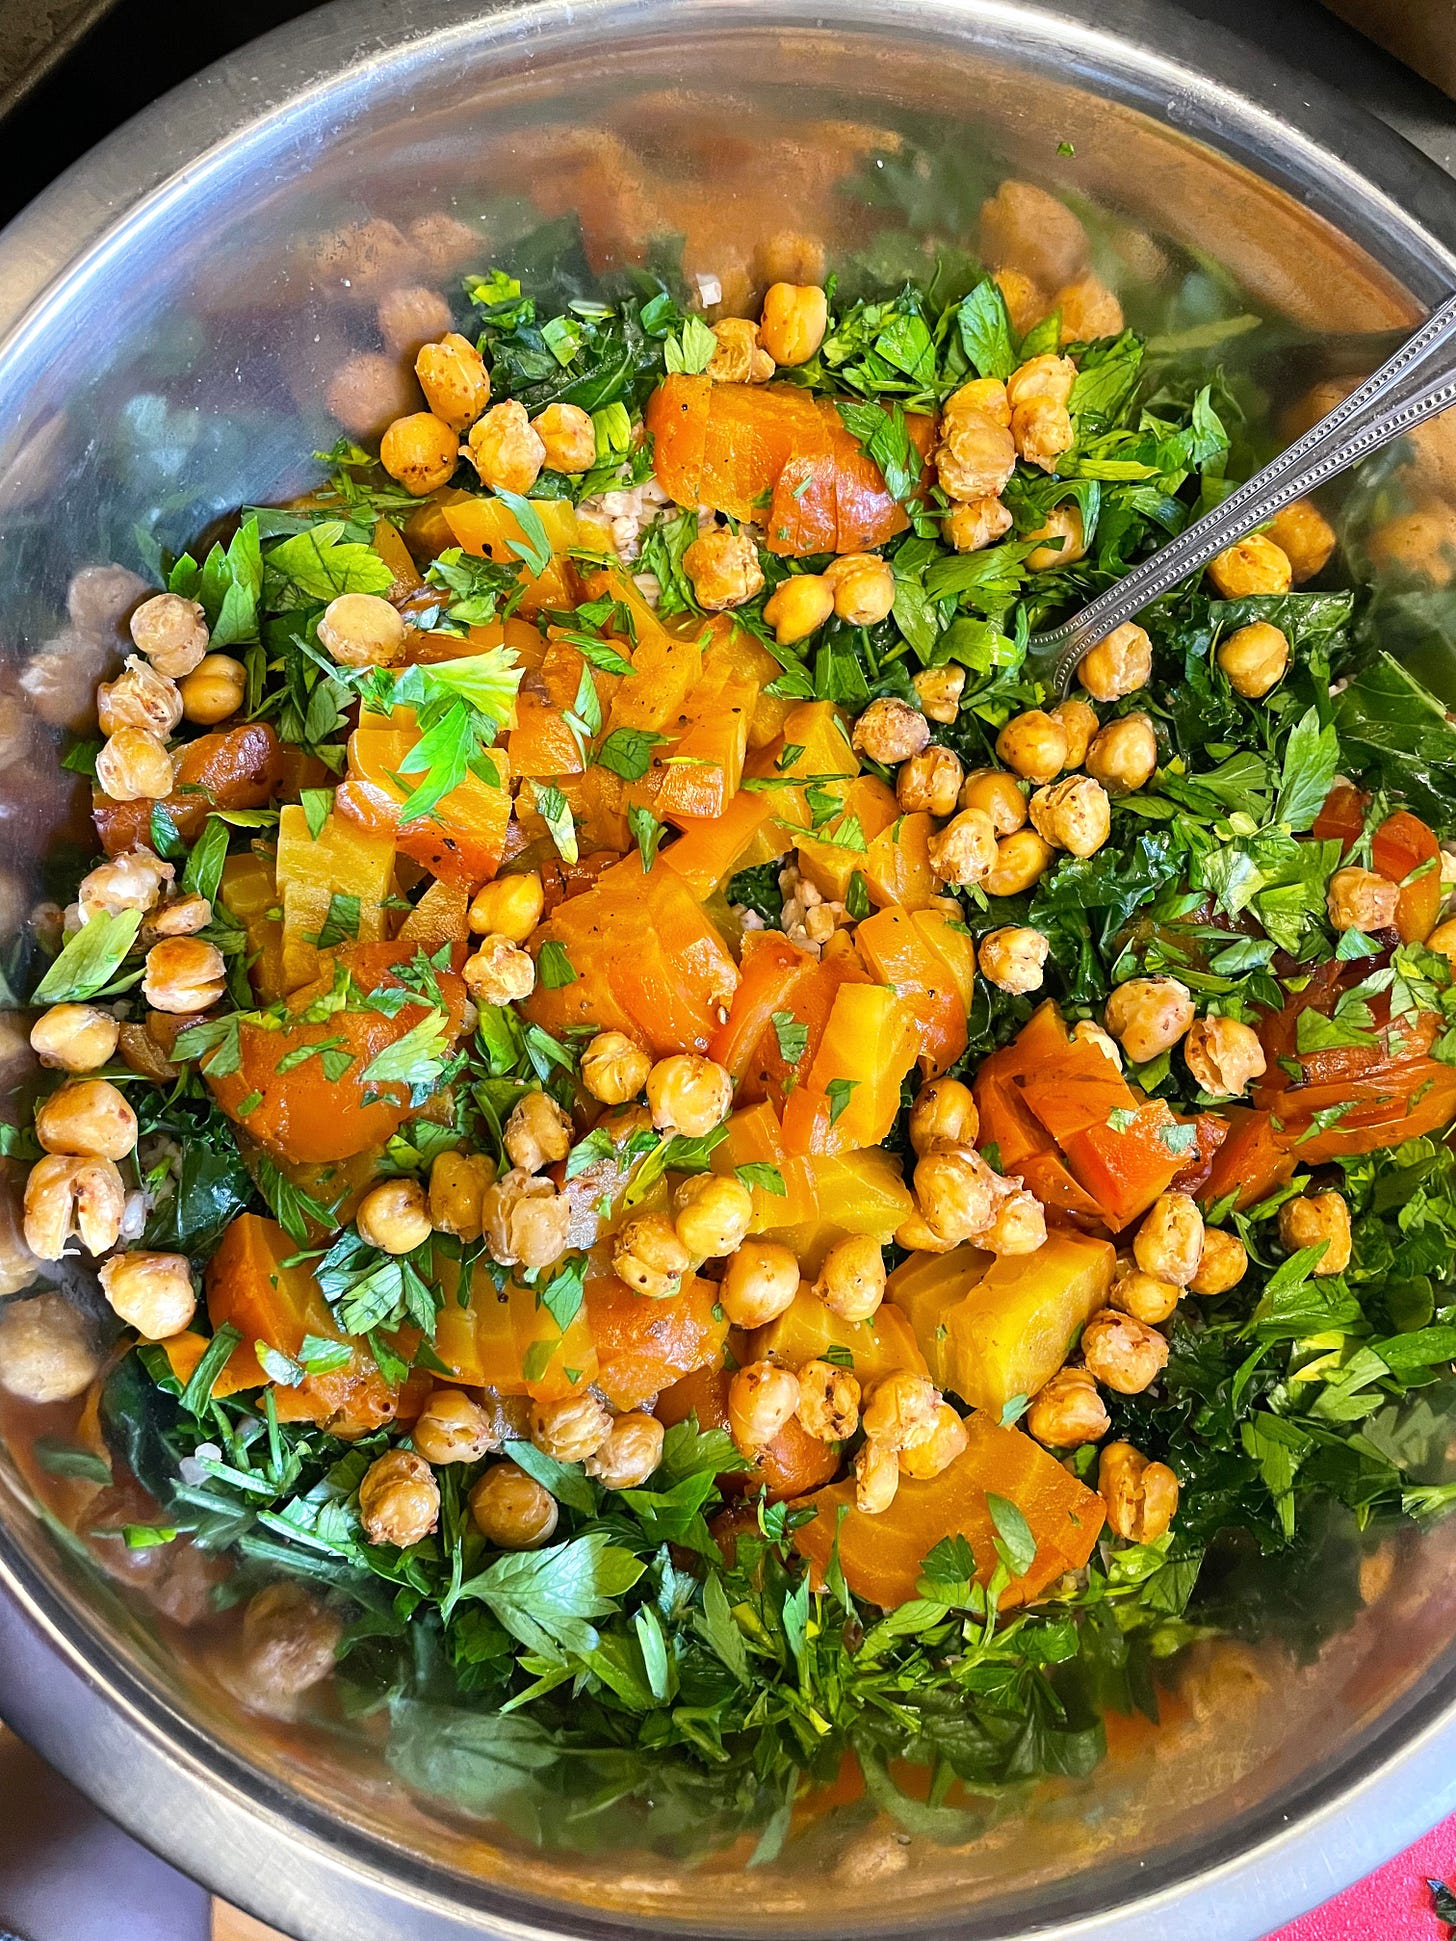 bowl of golden beets, chickpeas, kale, parsley